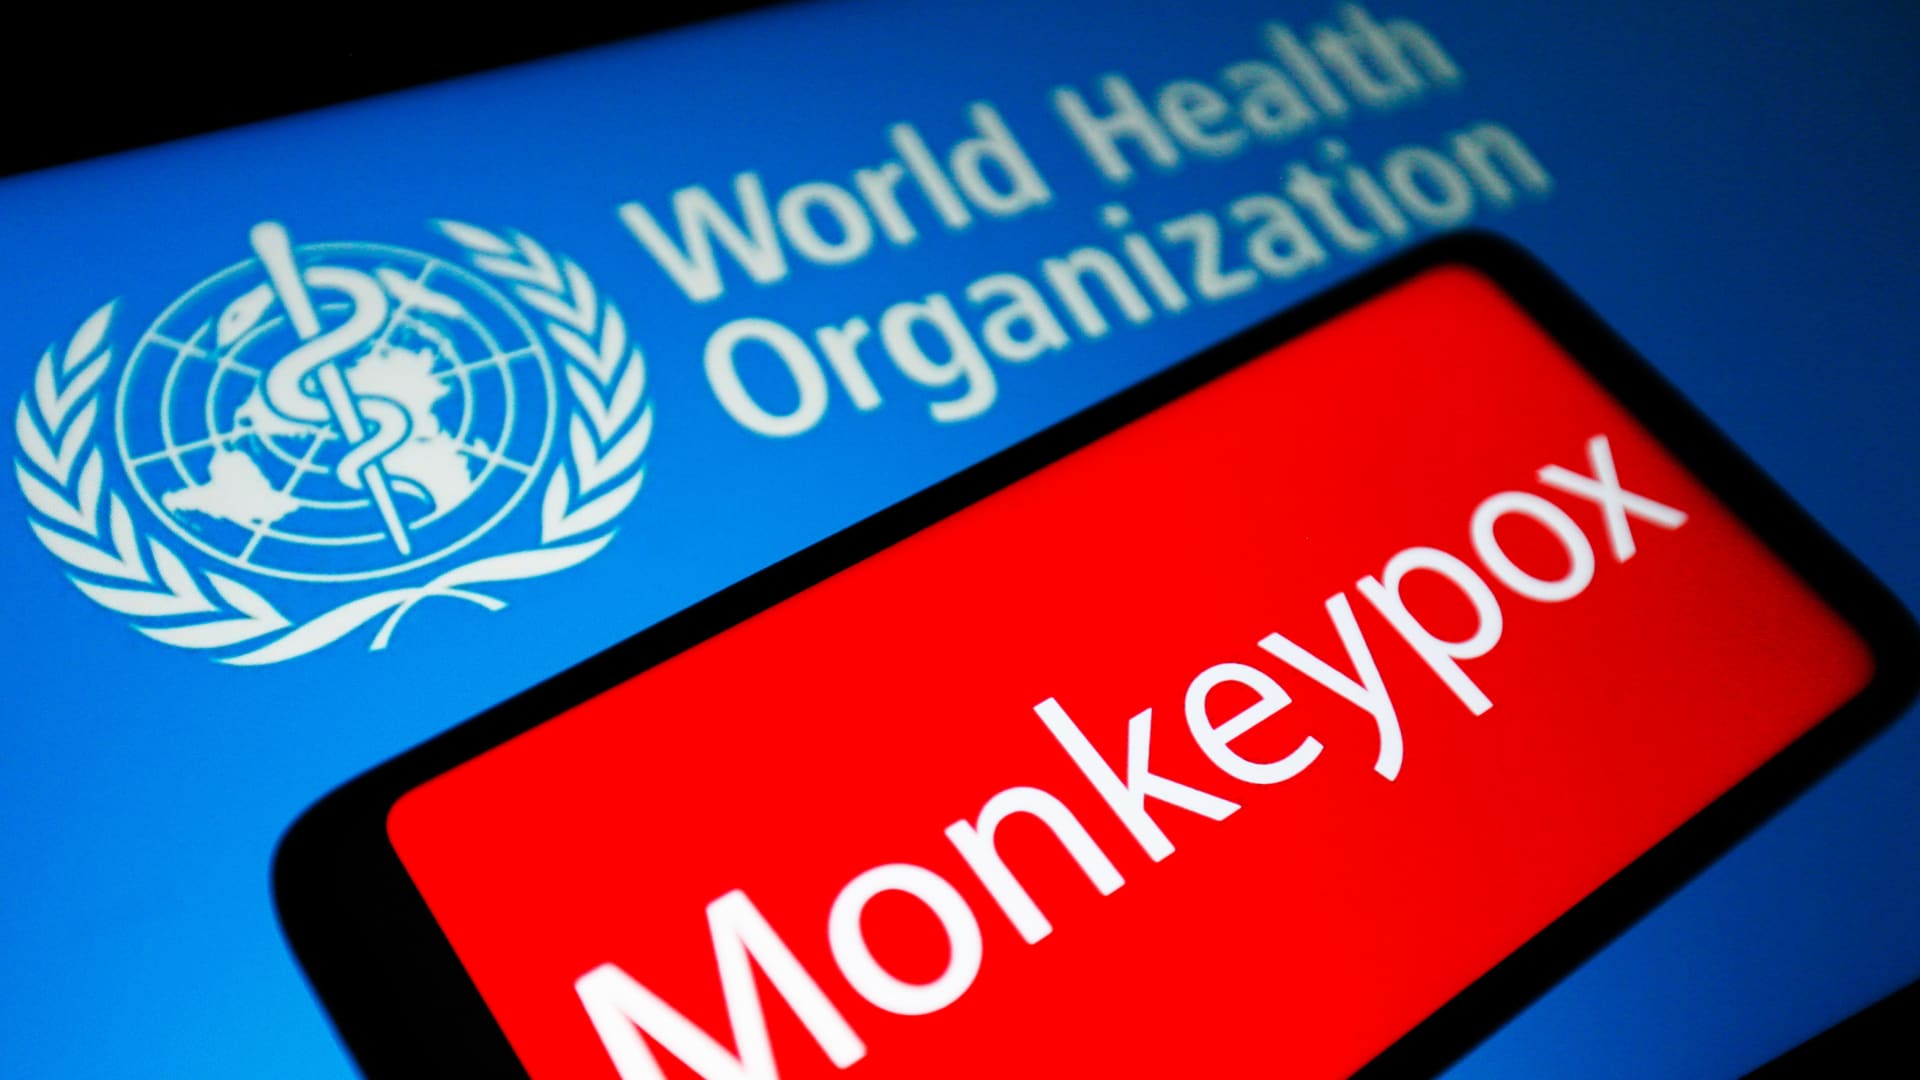 Monkeypox outbreak is primarily spreading through sex, WHO officials say – World news